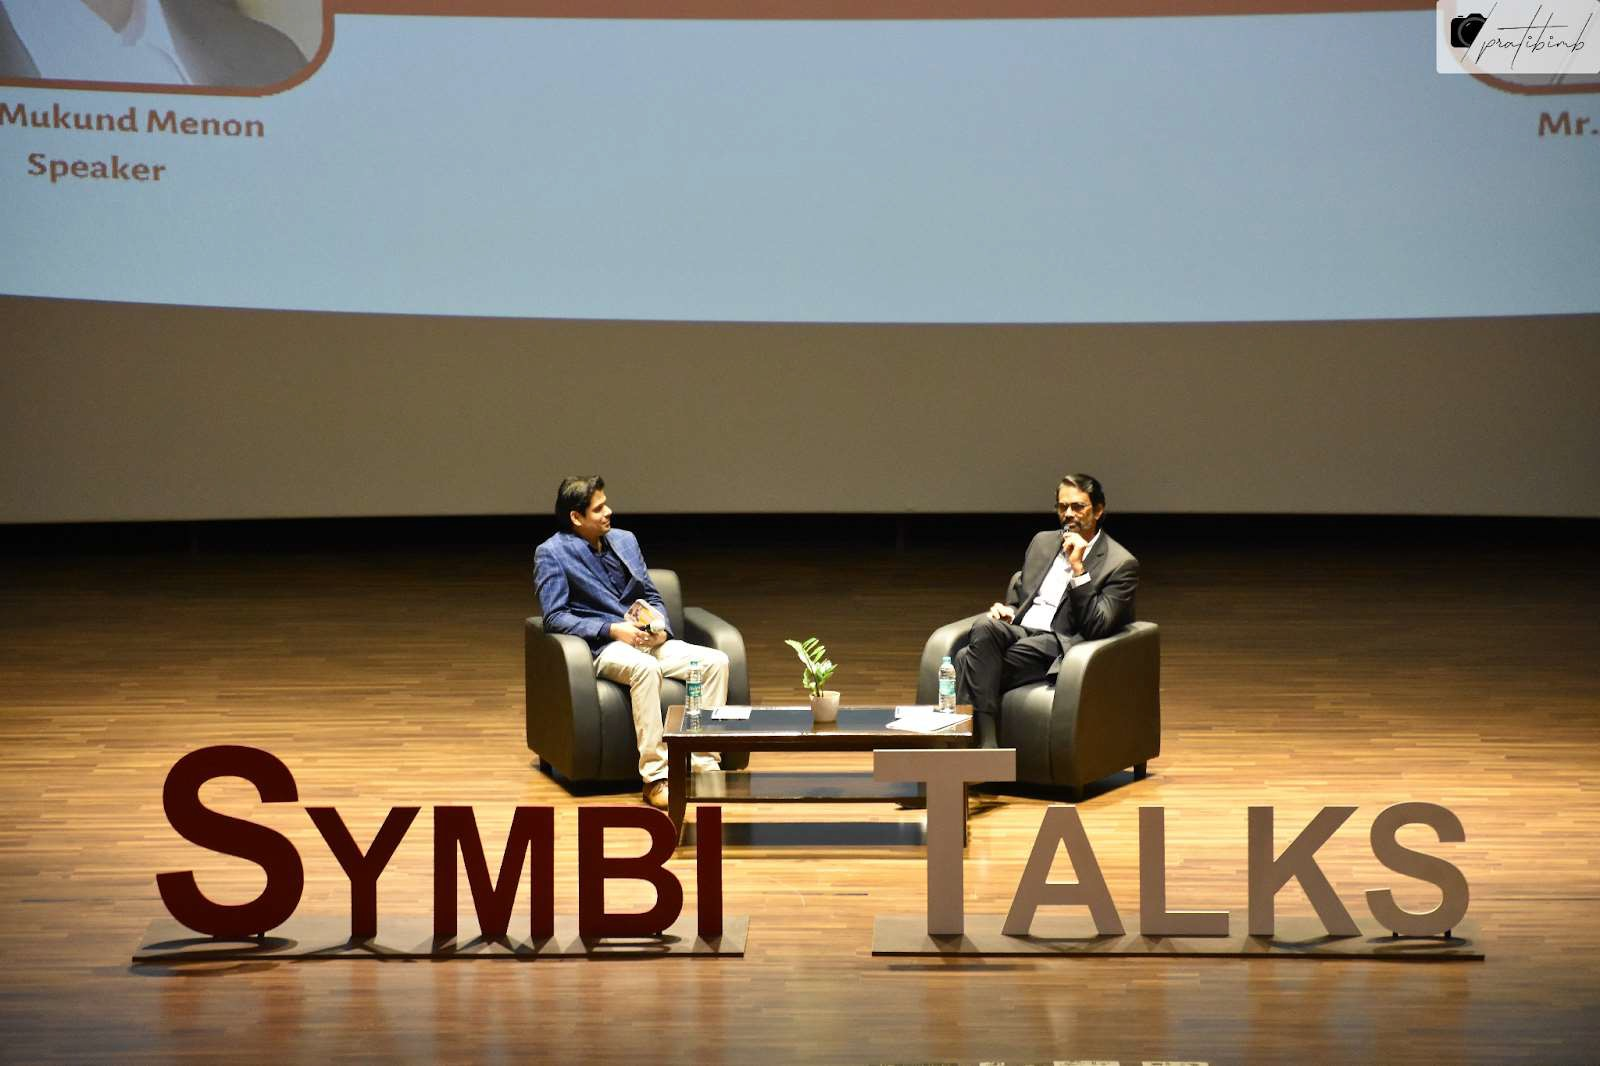 Images: Mr. Mukund Menon, Founder of Liveware People and Mr. Abhijeet, Alumni in Ardent Chats.
